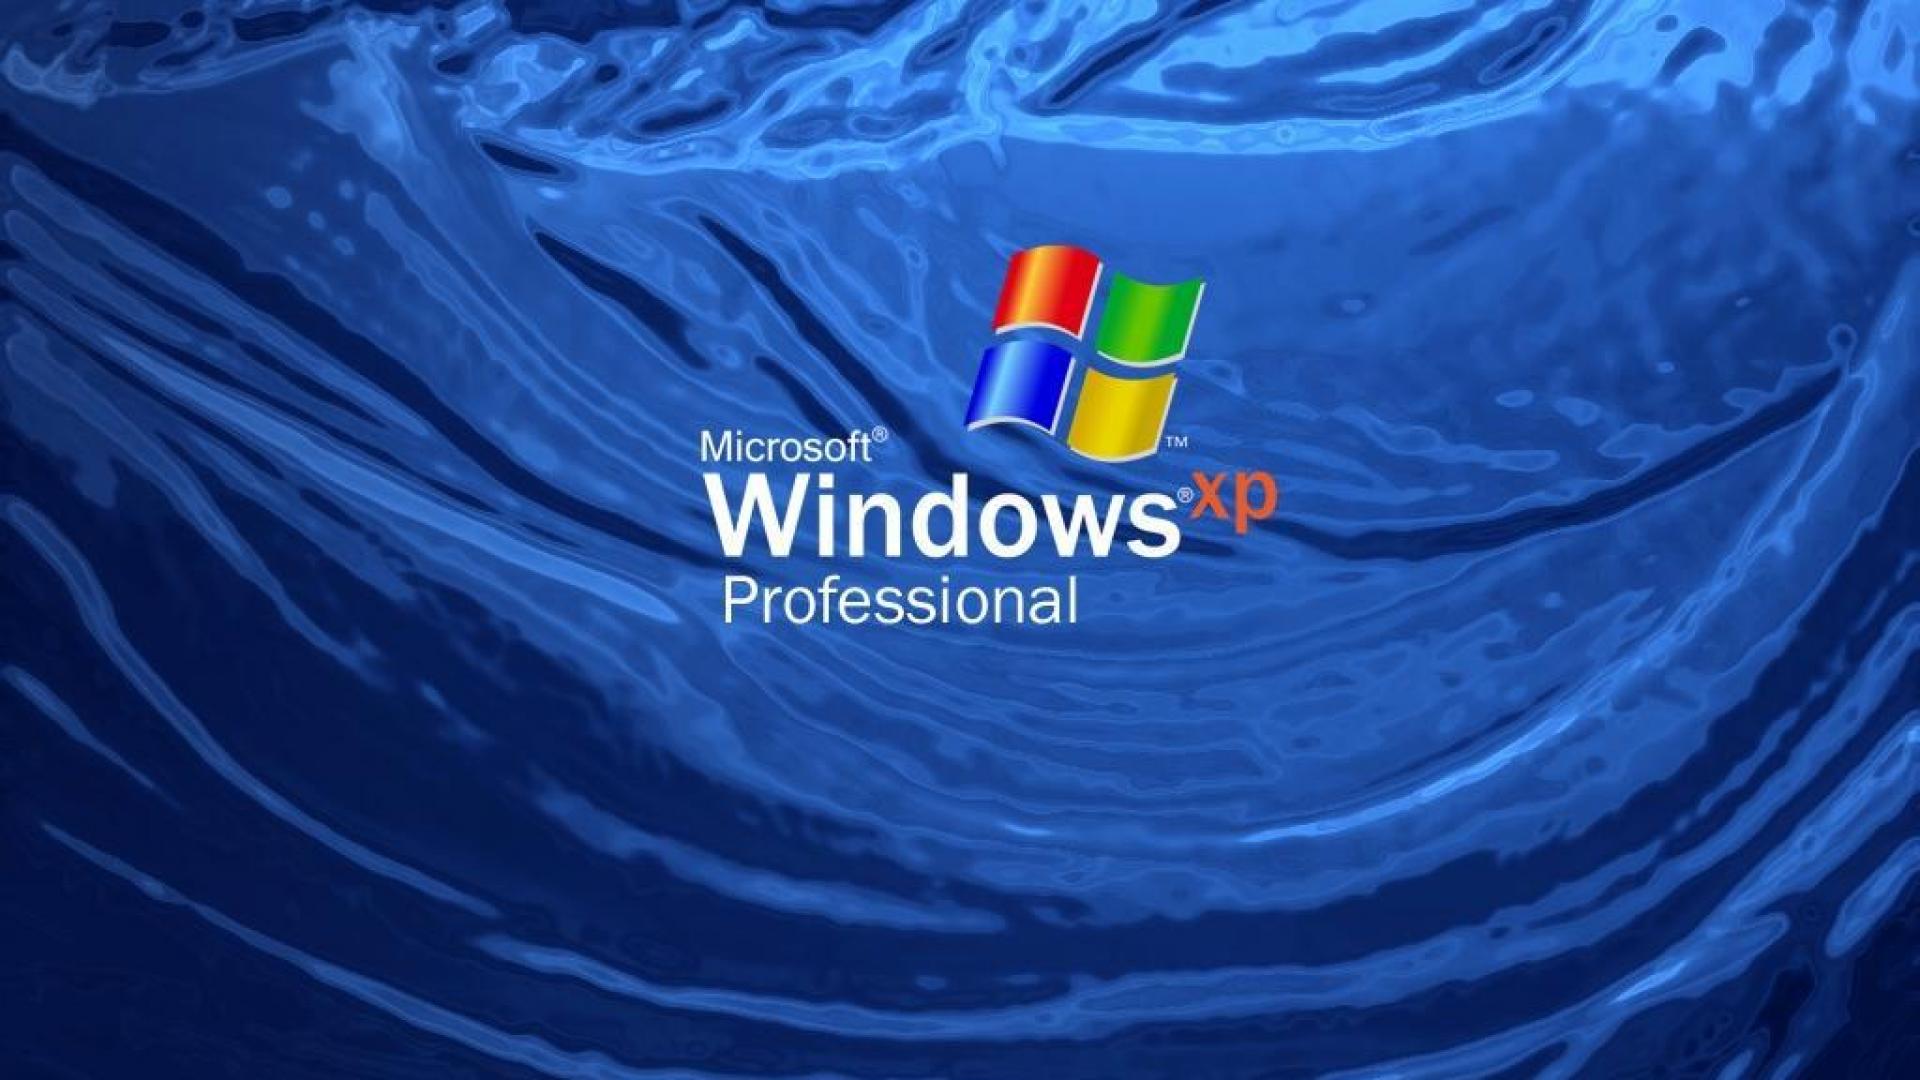 Windows XP Professional Wallpapers